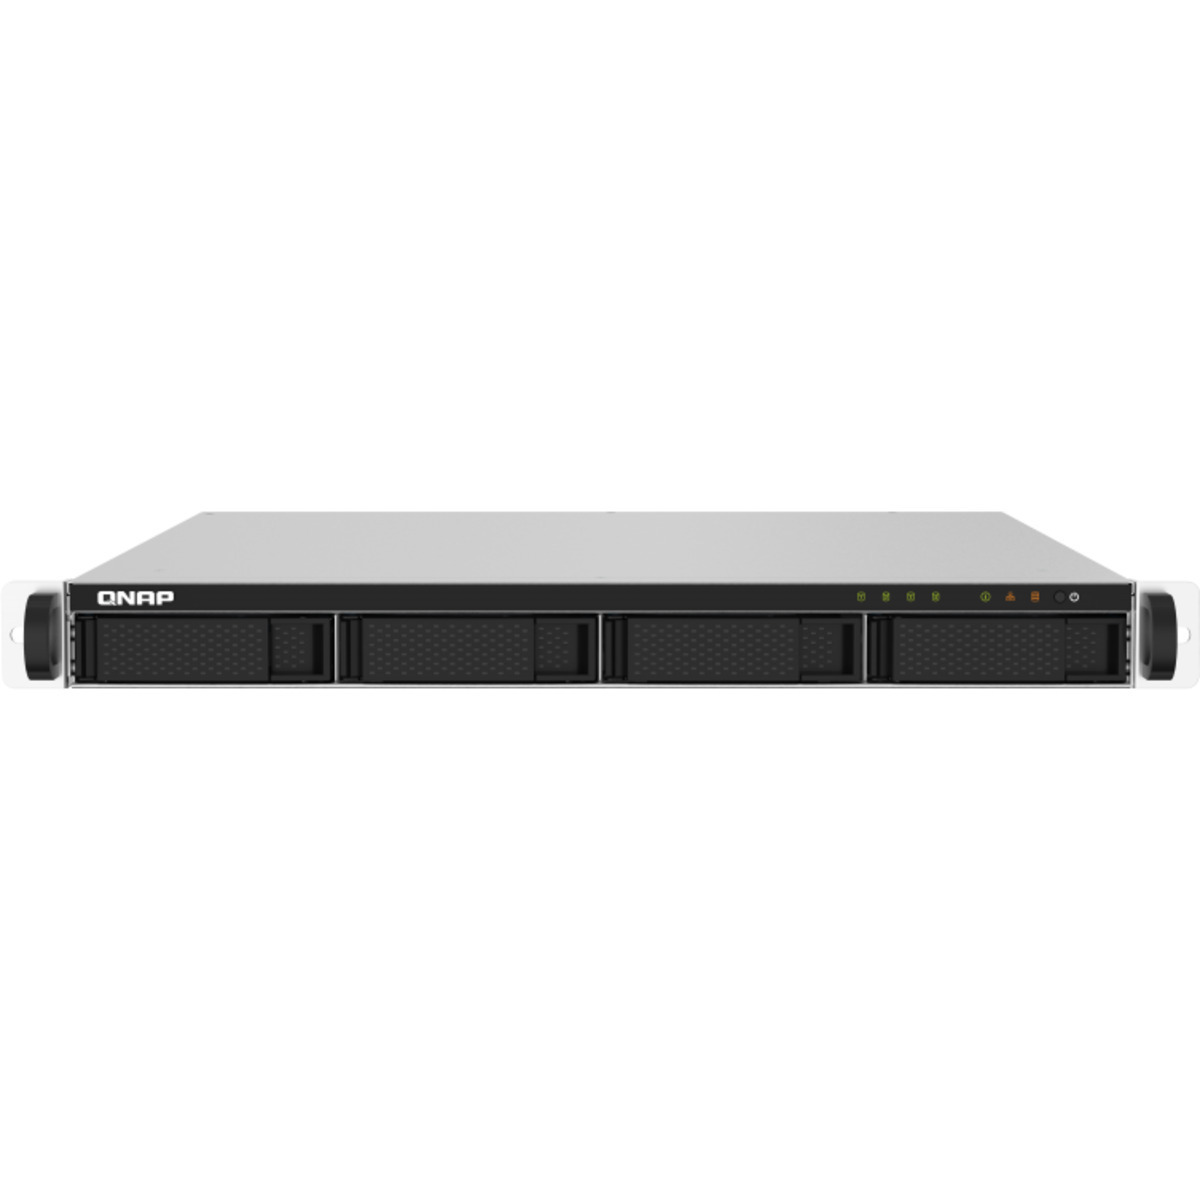 buy $1921 QNAP TS-432PXU 8tb RackMount NAS - Network Attached Storage Device 4x2000gb Western Digital Red SA500 WDS200T1R0A 2.5 SATA 6Gb/s SSD NAS Class Drives Installed - Burn-In Tested - FREE RAM UPGRADE - nas headquarters buy network attached storage server device das new raid-5 free shipping usa TS-432PXU